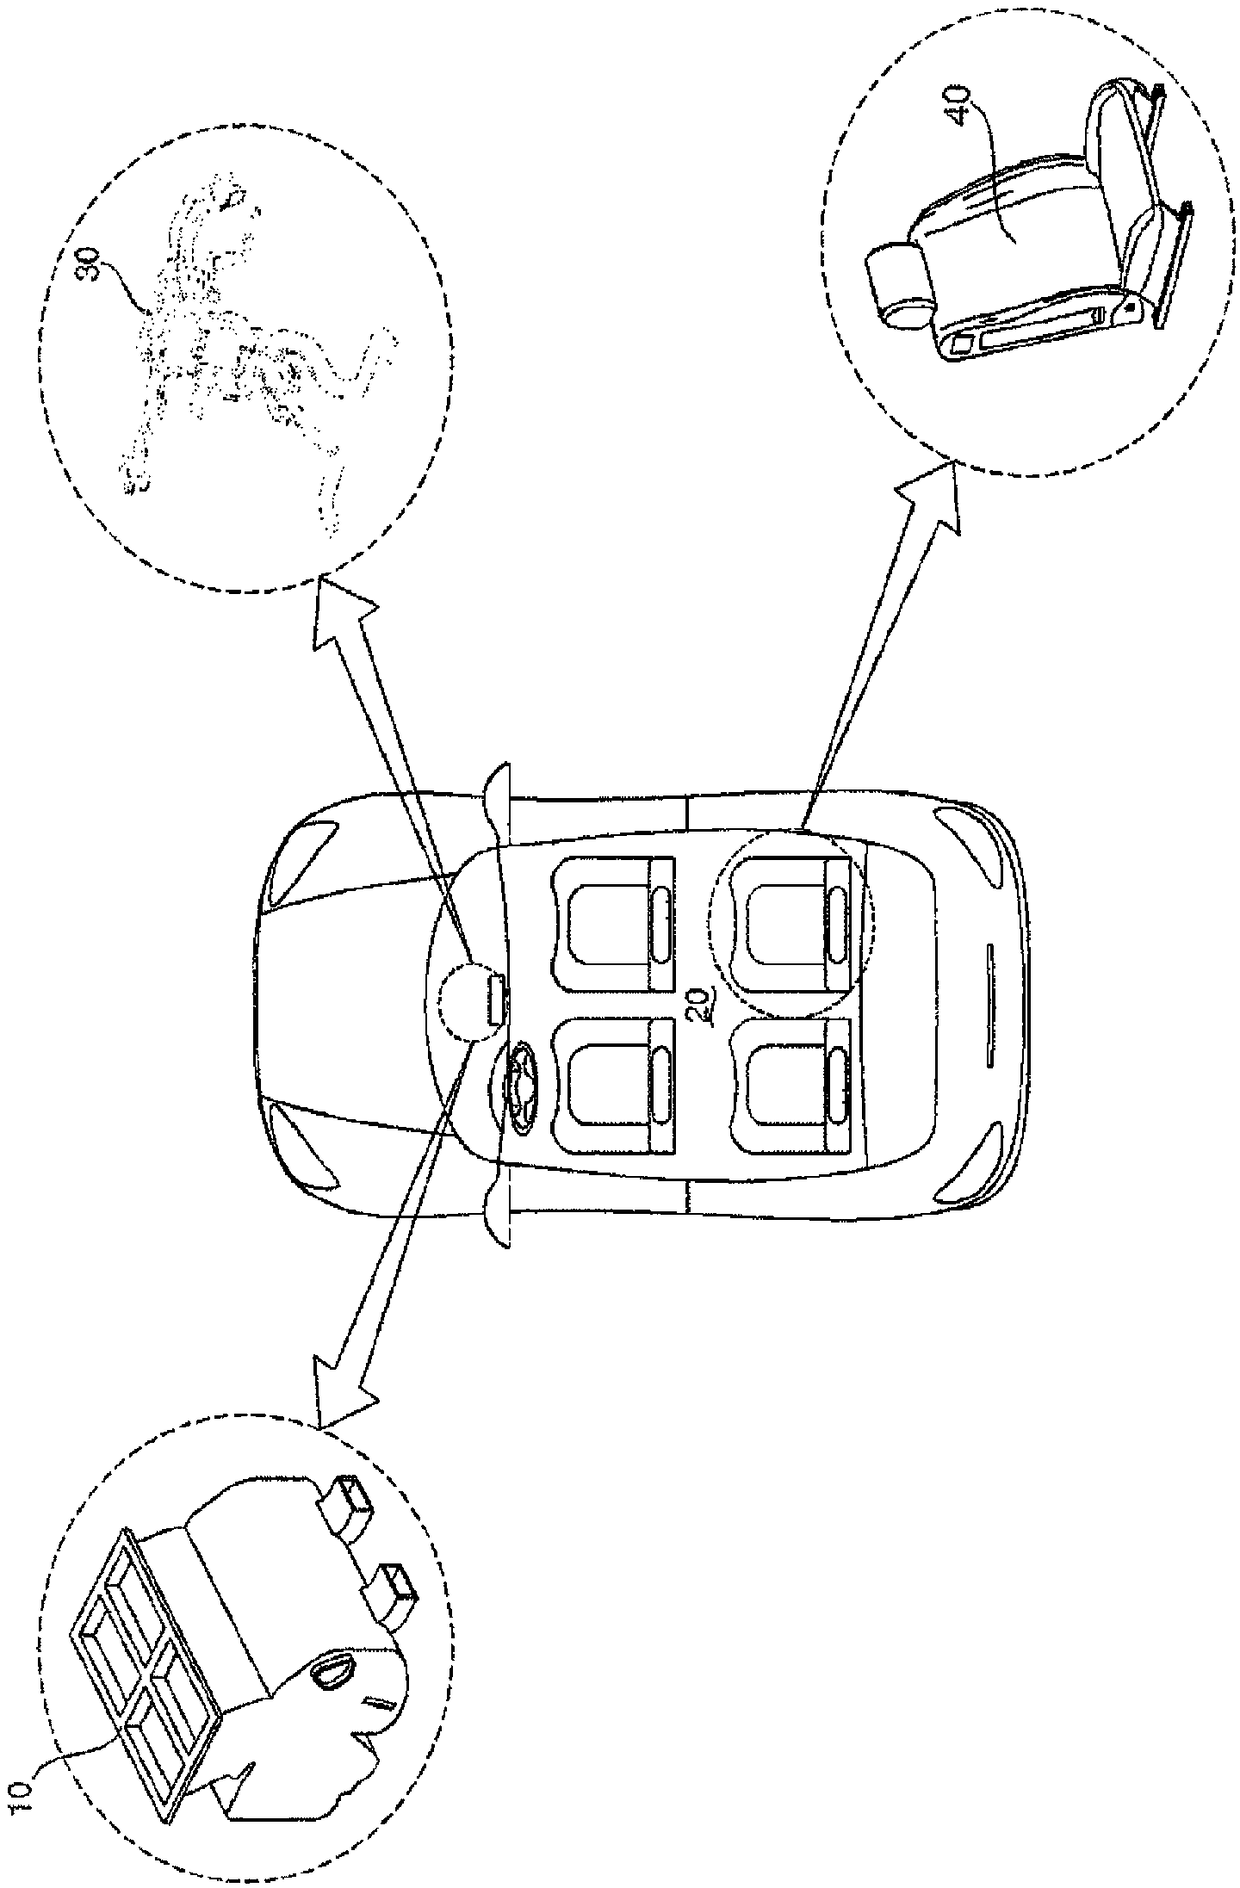 System for preventing generation of odor in vehicle and removing generated odor from vehicle